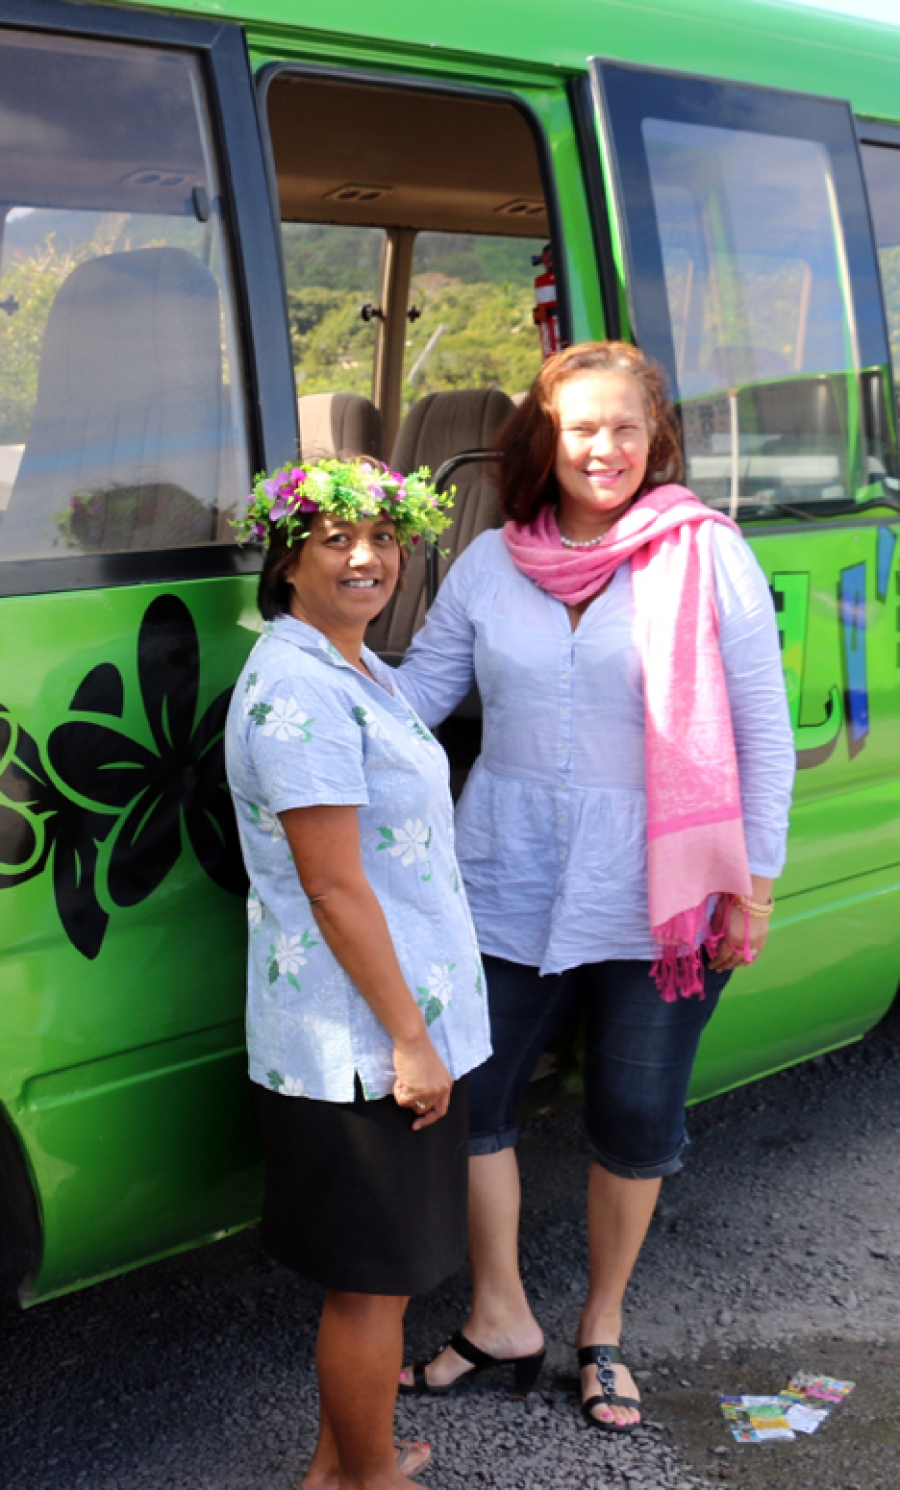 Mammogram bus takes to the road